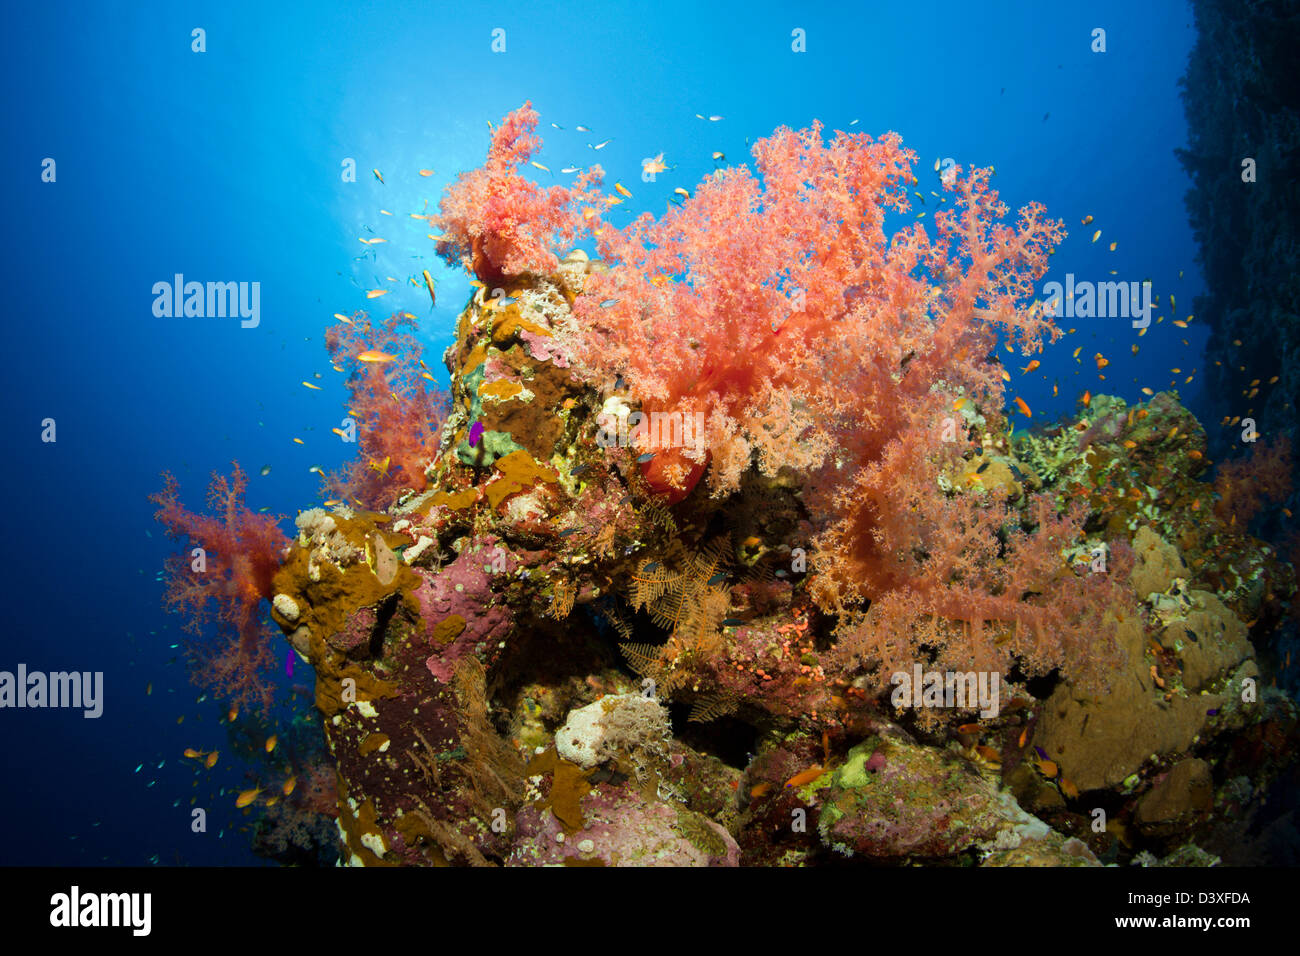 Soft Coral Reef, Dendronephthya sp., St. Johns Reef, Mar Rosso, Egitto Foto Stock